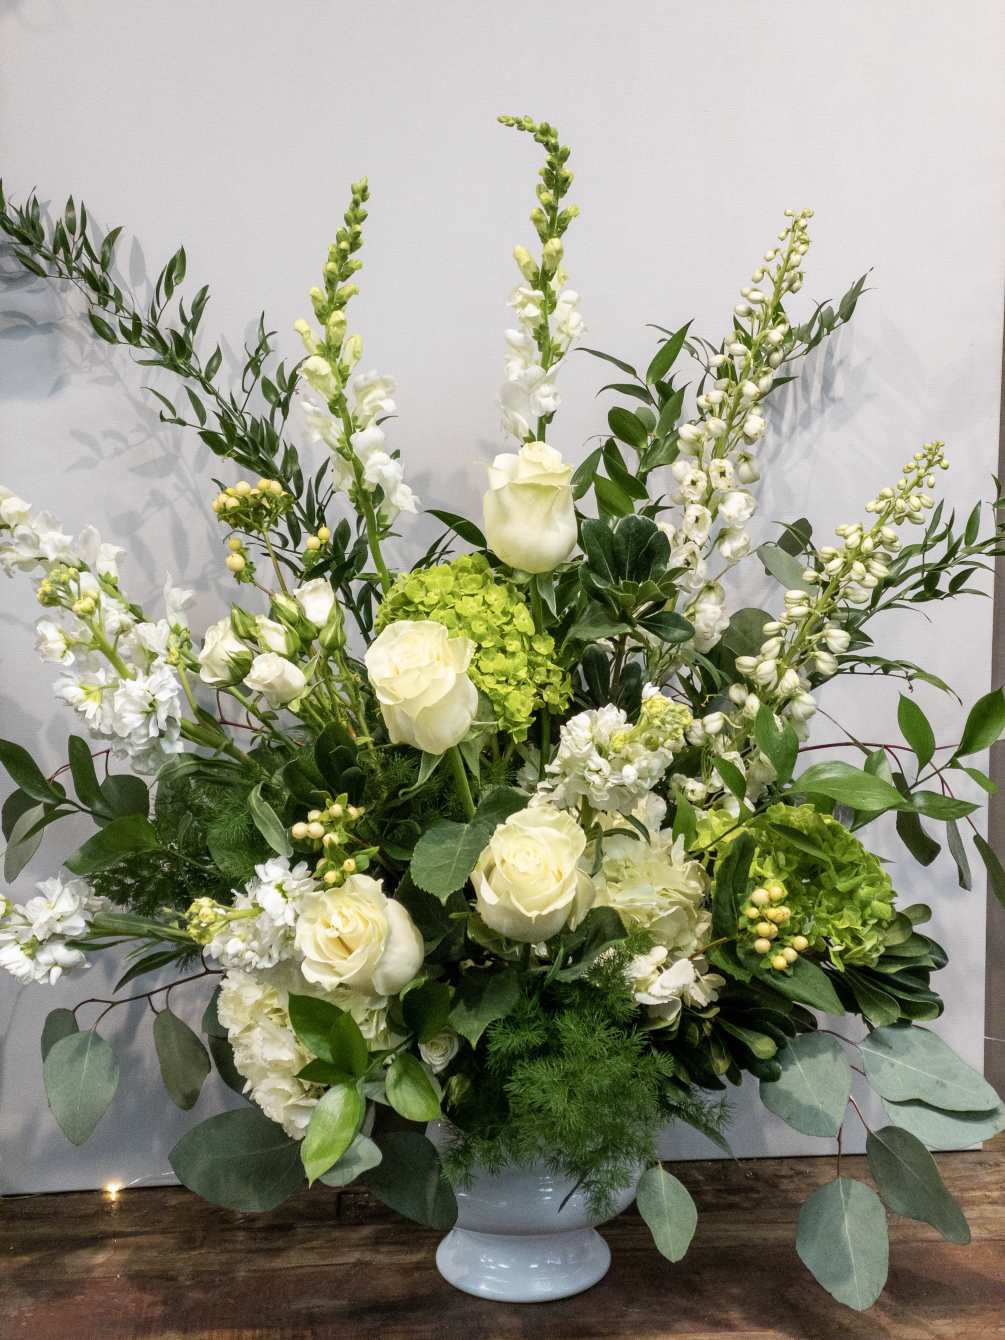 Our signature sympathy arrangement features crisp whites and lush greens of the